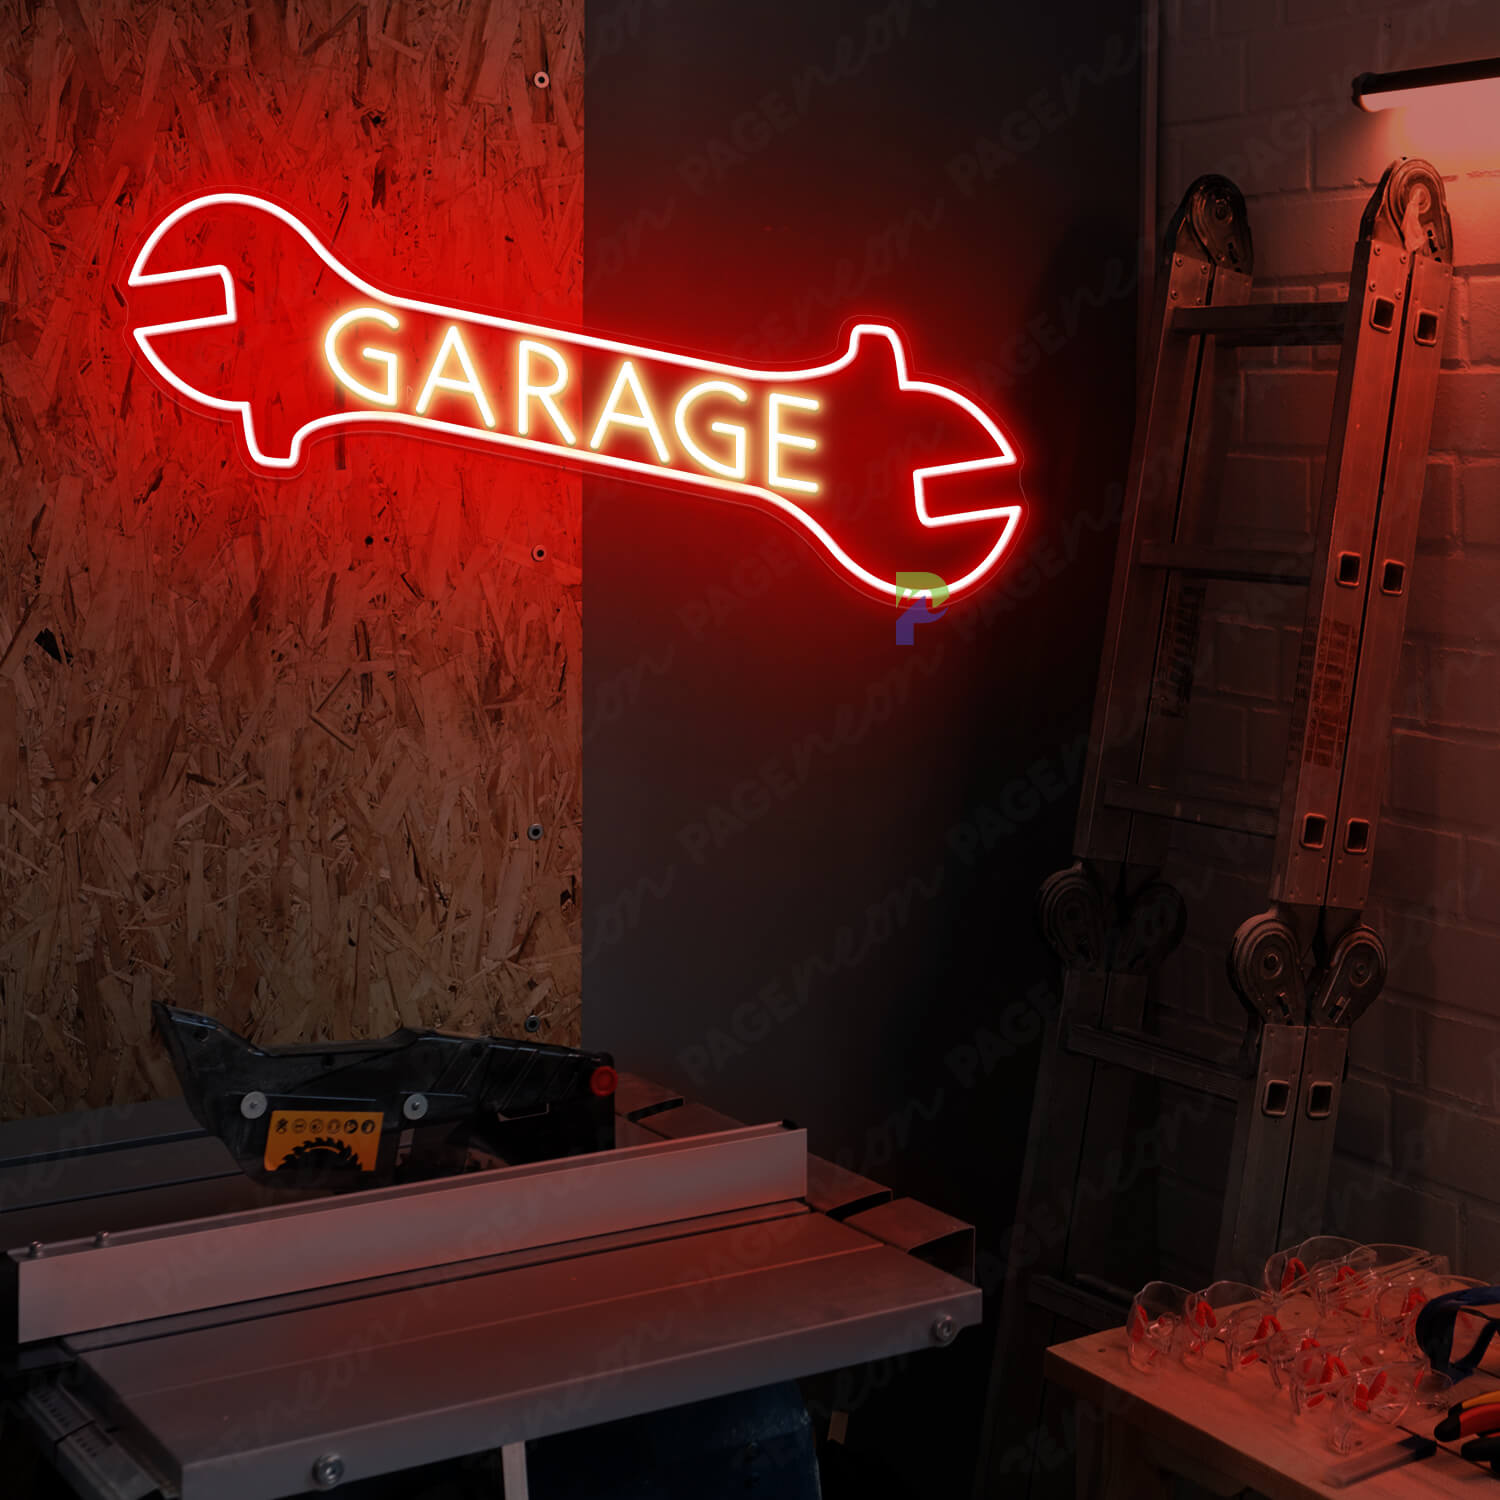  Garage Neon Sign Wrench Led Light Red